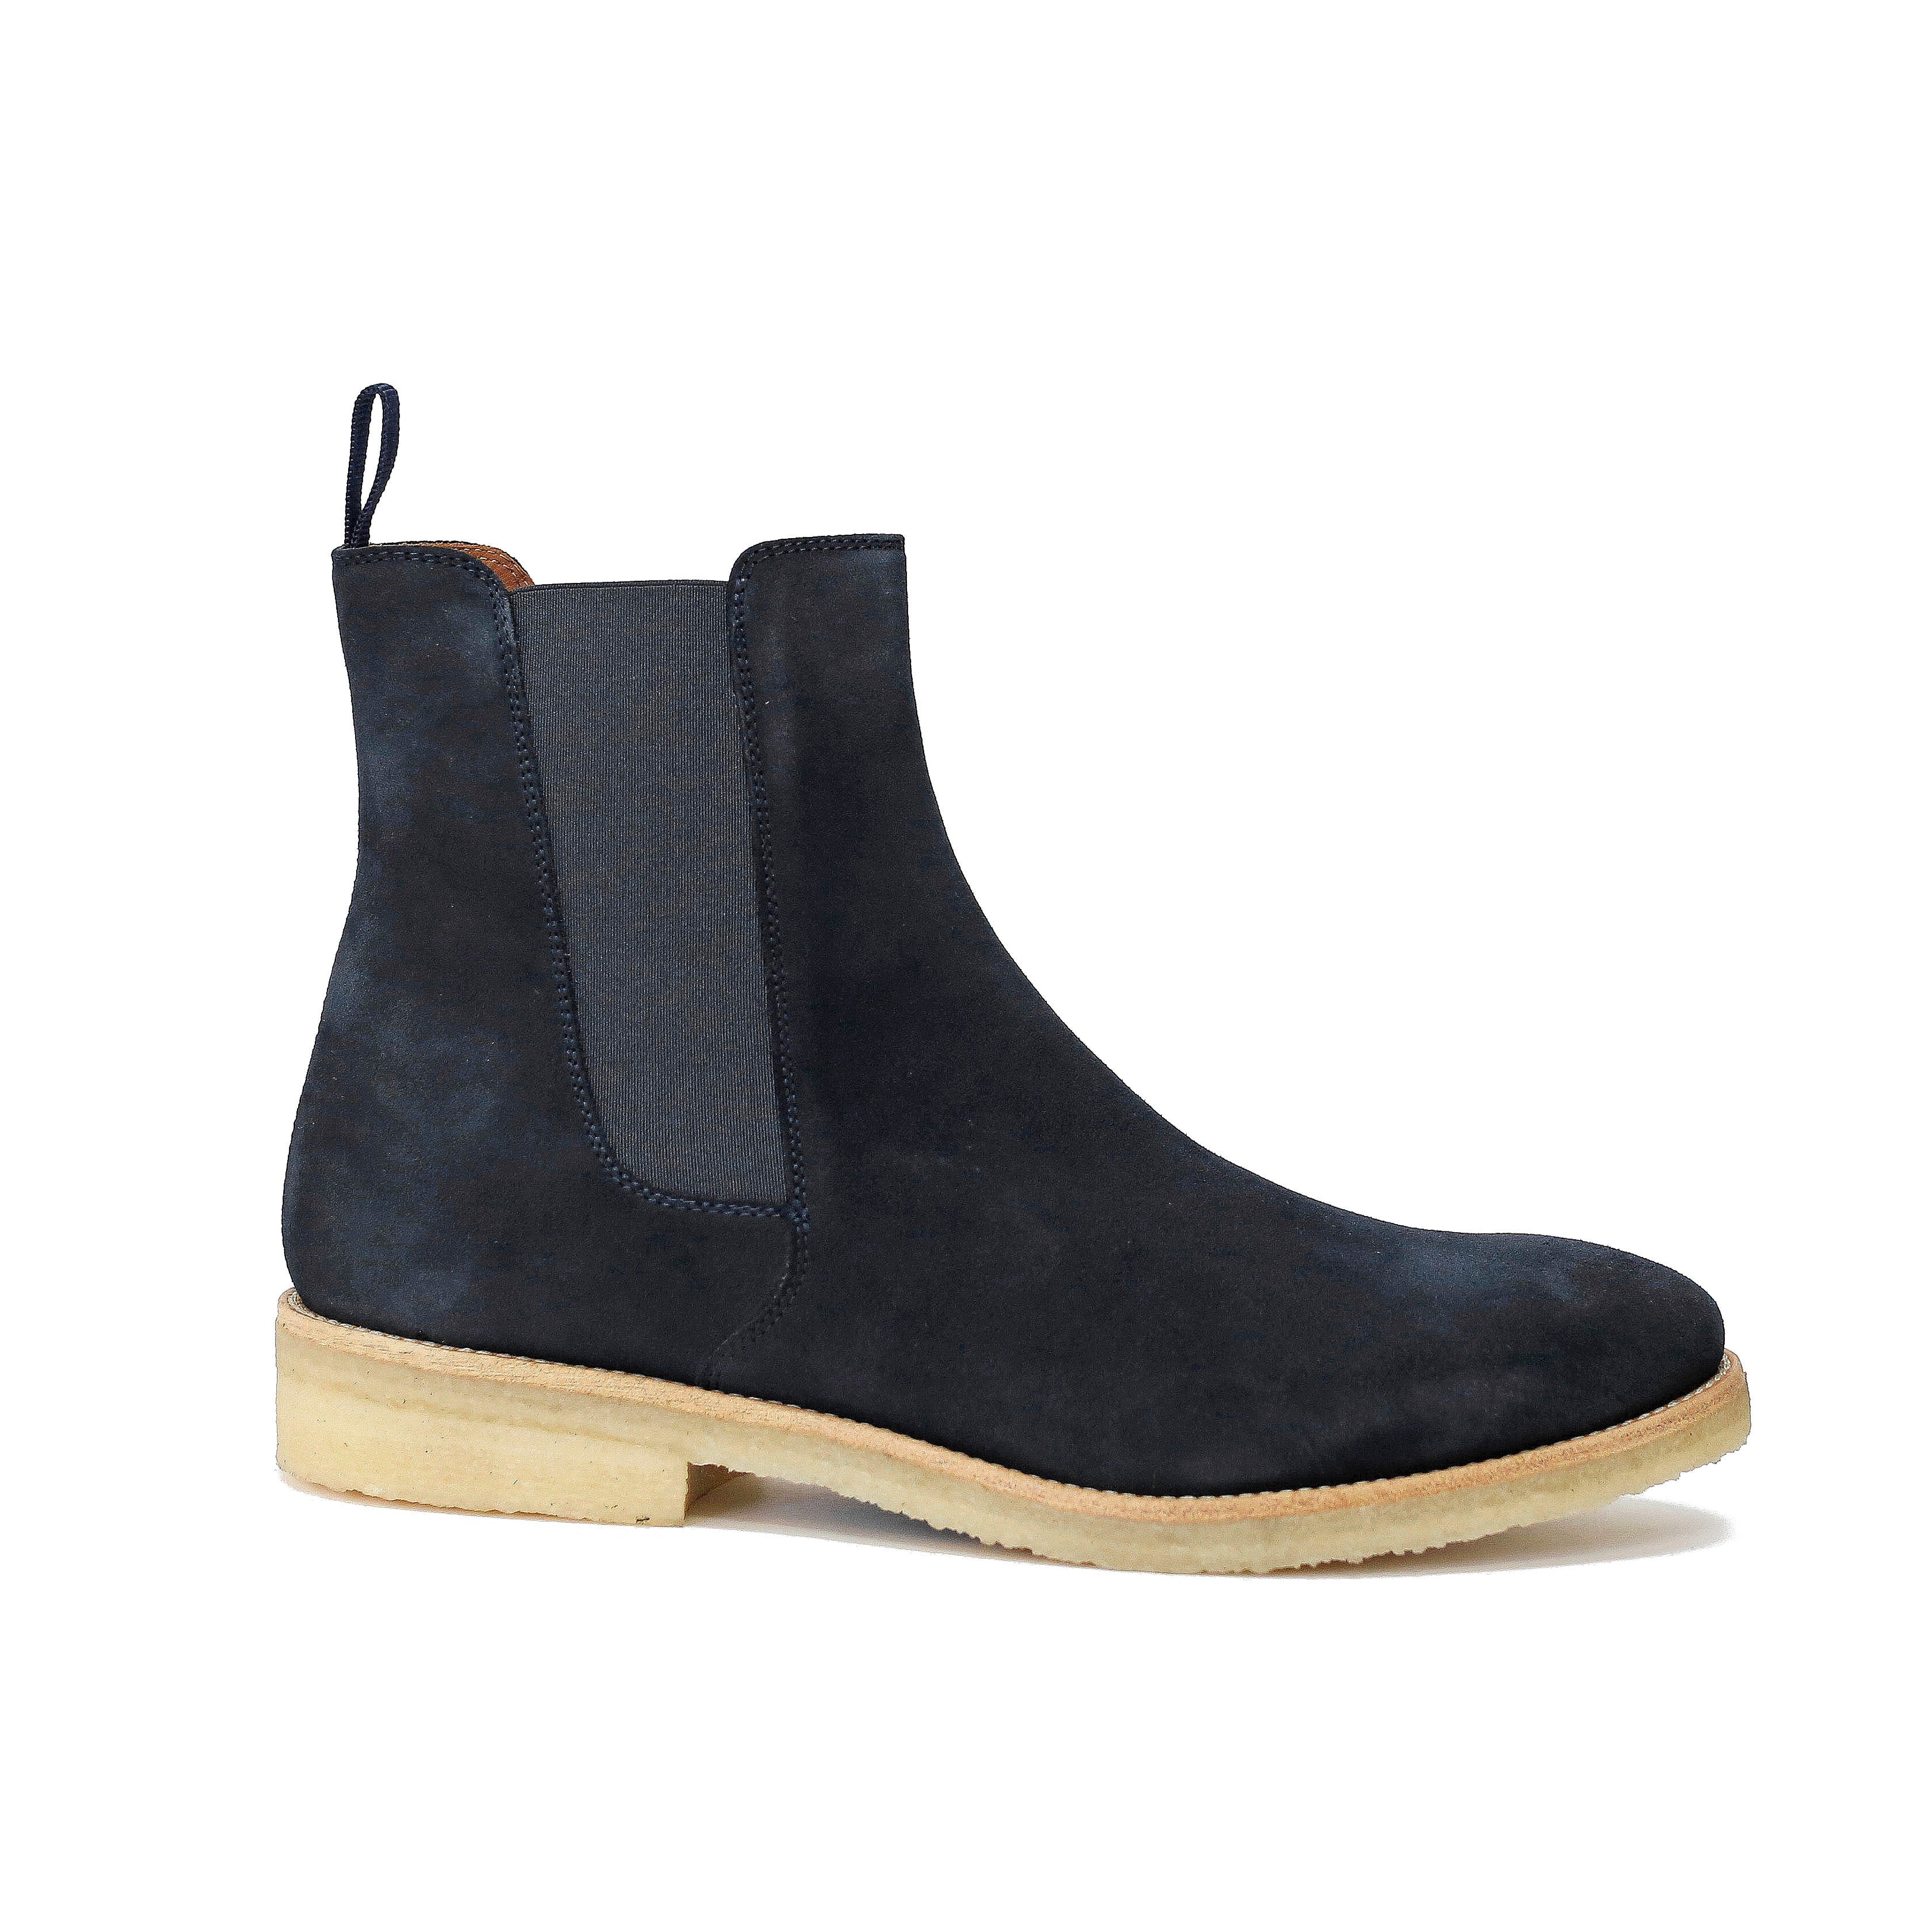 THE PRUSIA CREPE CHELSEA BOOTS | ORO Los Angeles